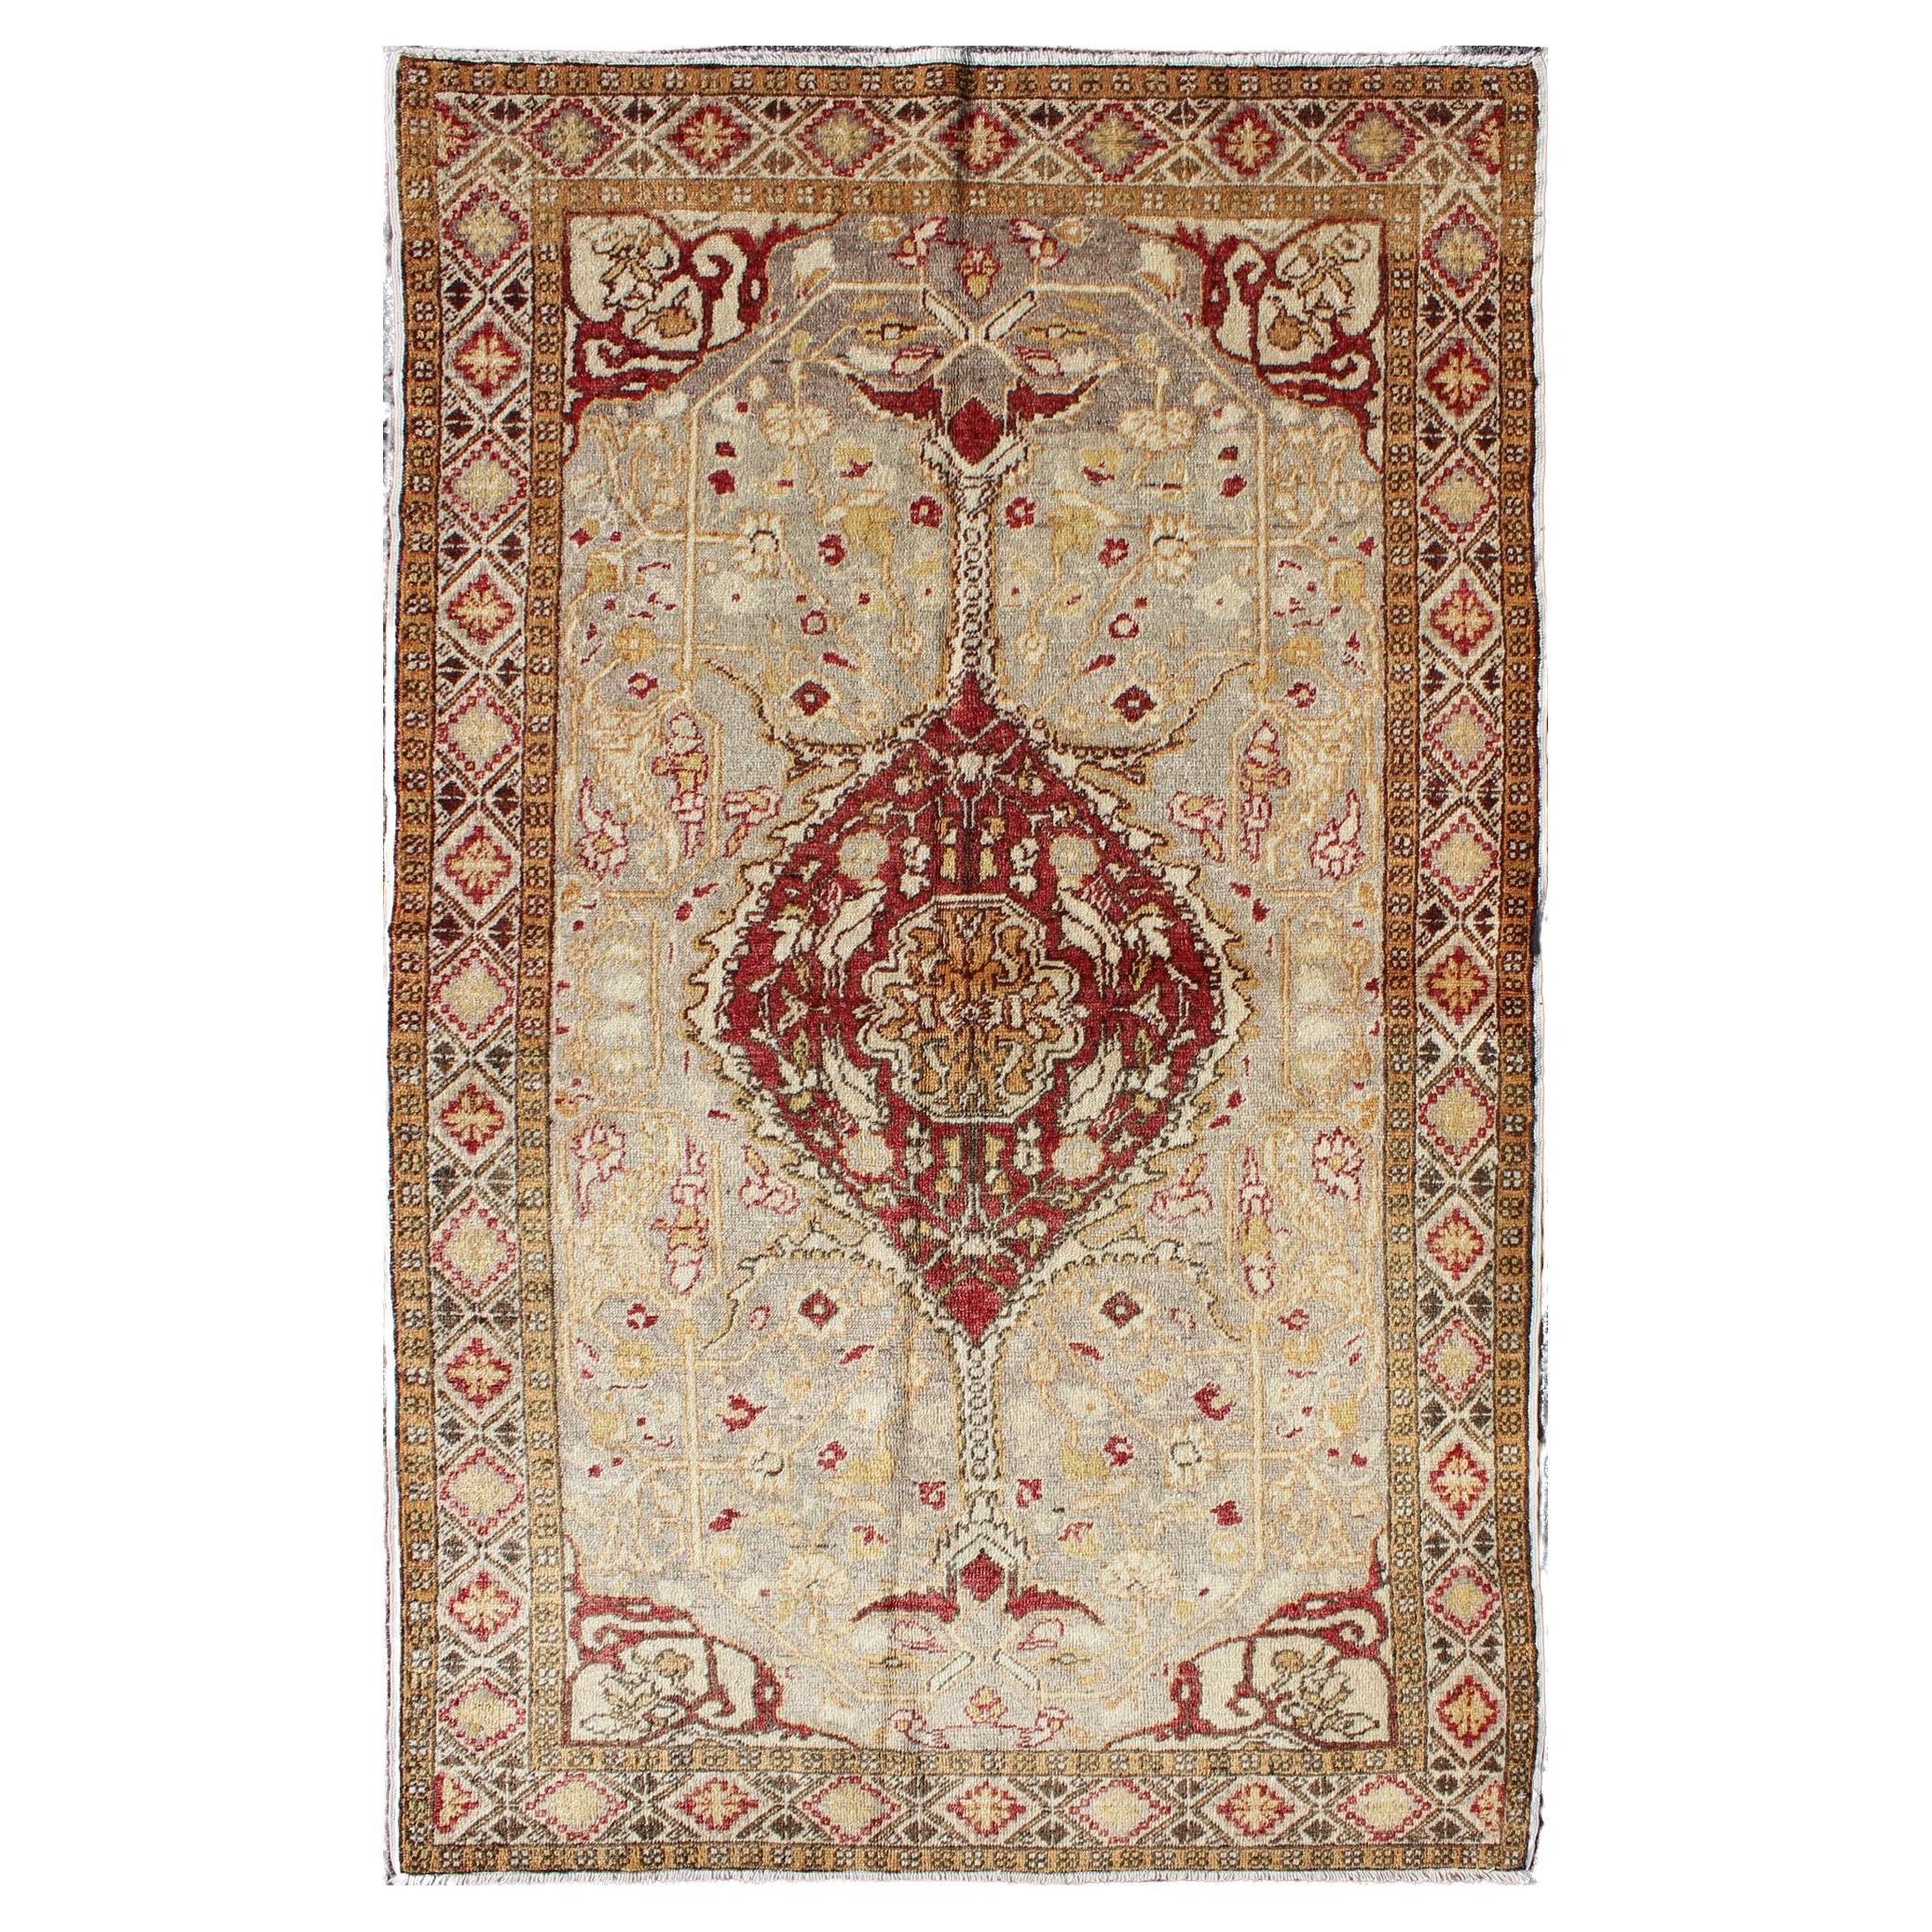 Vintage Turkish Medallion Oushak Area Rug in Red, Taupe, Gold, and Cocoa